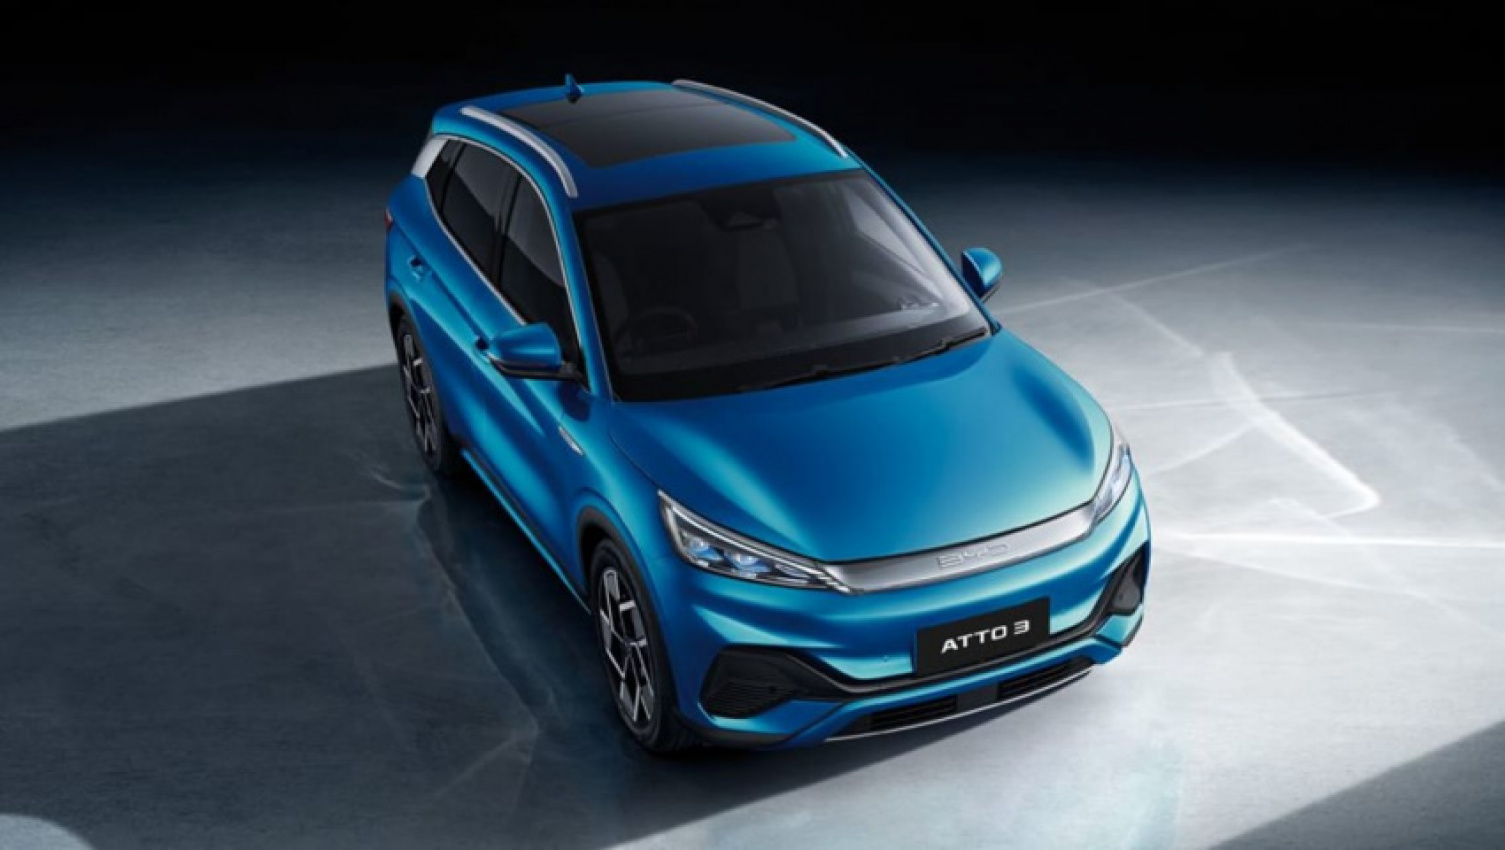 autos, byd, cars, byd news, electric, electric cars, industry news, tesla news, volkswagen, volkswagen news, byd and other chinese electric car brands to boost ev uptake in australia, but better supply from other global manufacturers would help: ev council